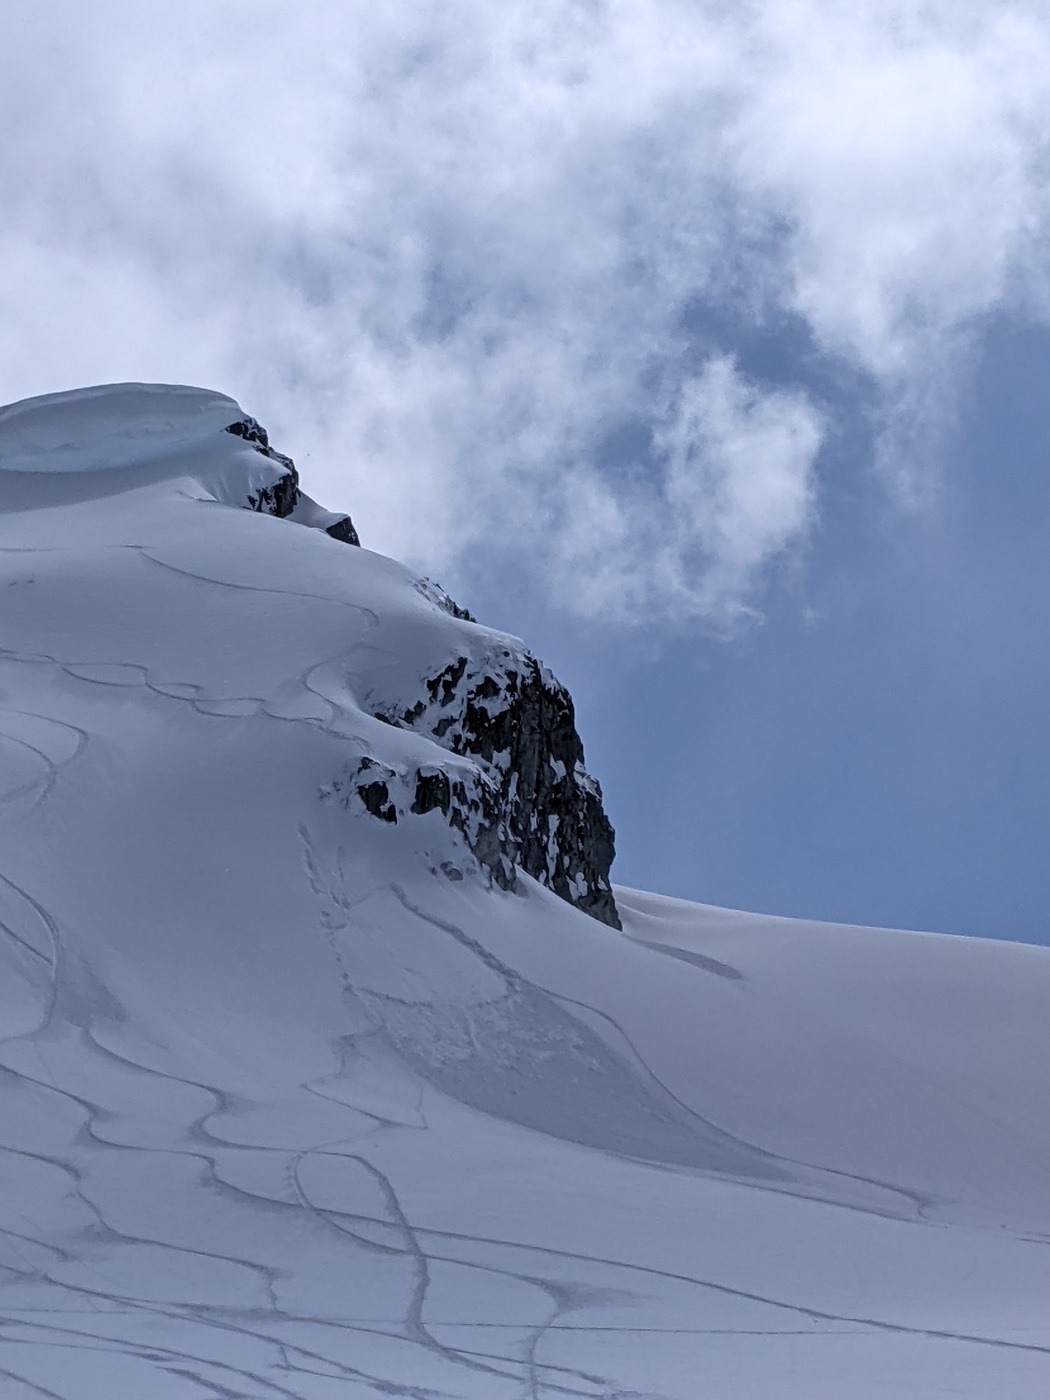 Numerous tracks on the bottom left of the image. In the centre is a small avalanche triggered below a cliff.